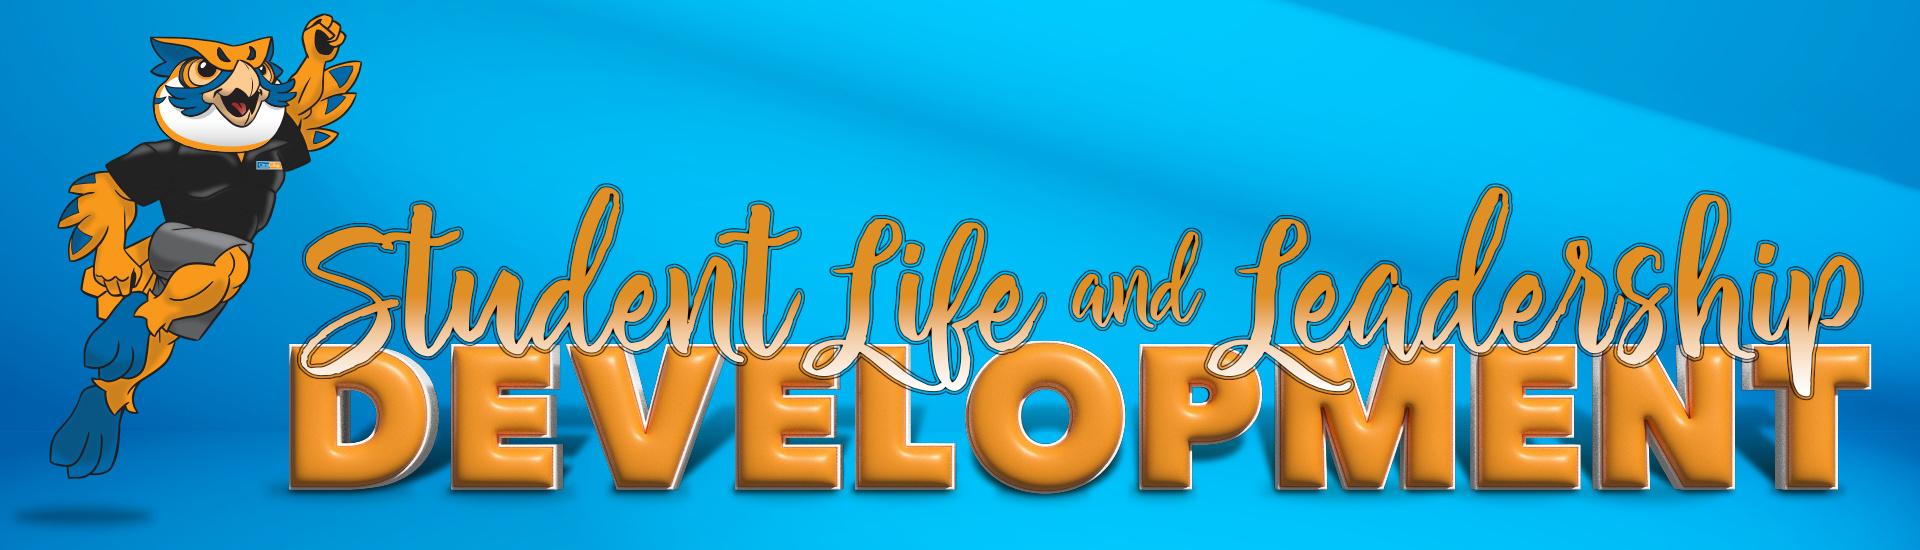 Student Life and Leadership Development in a script font